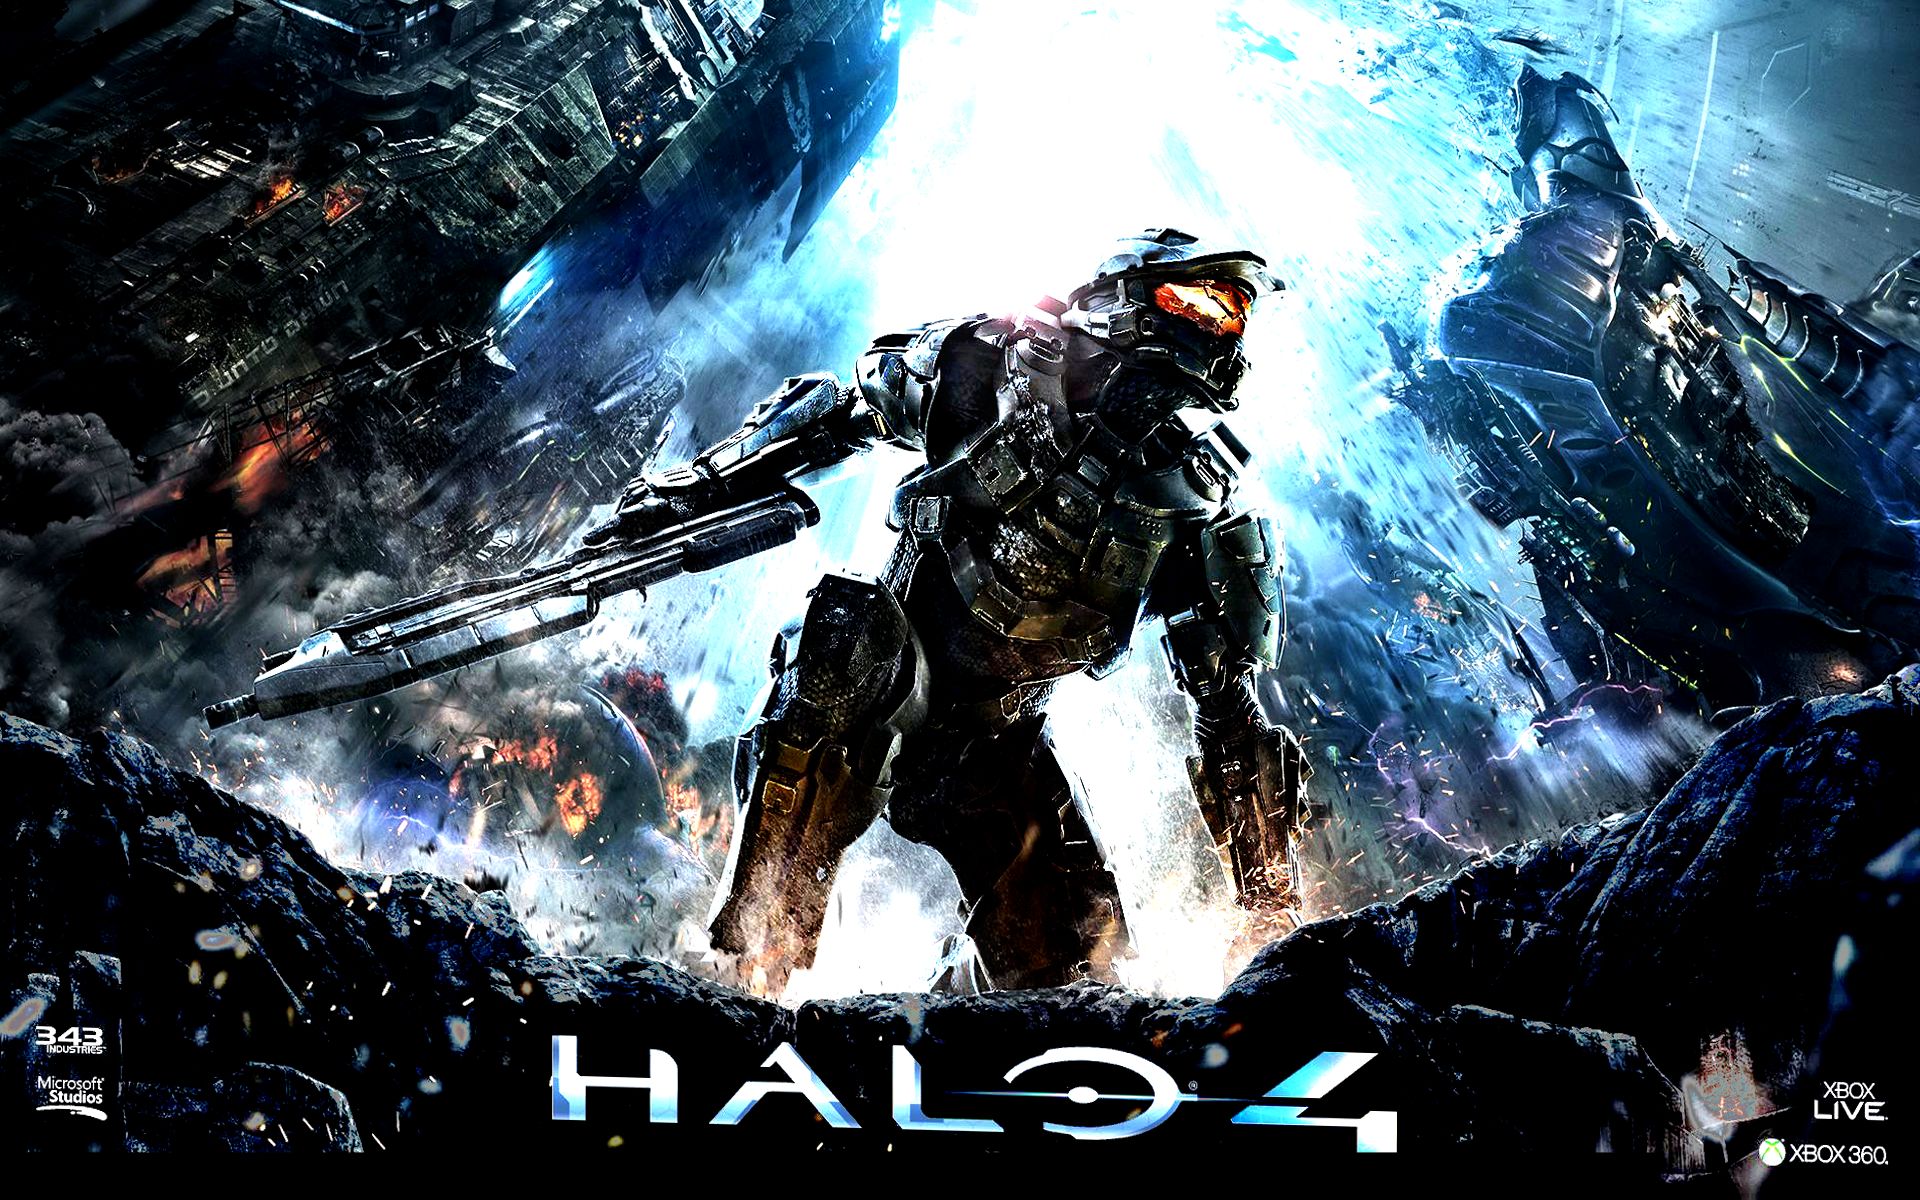 halo 4, video game, halo